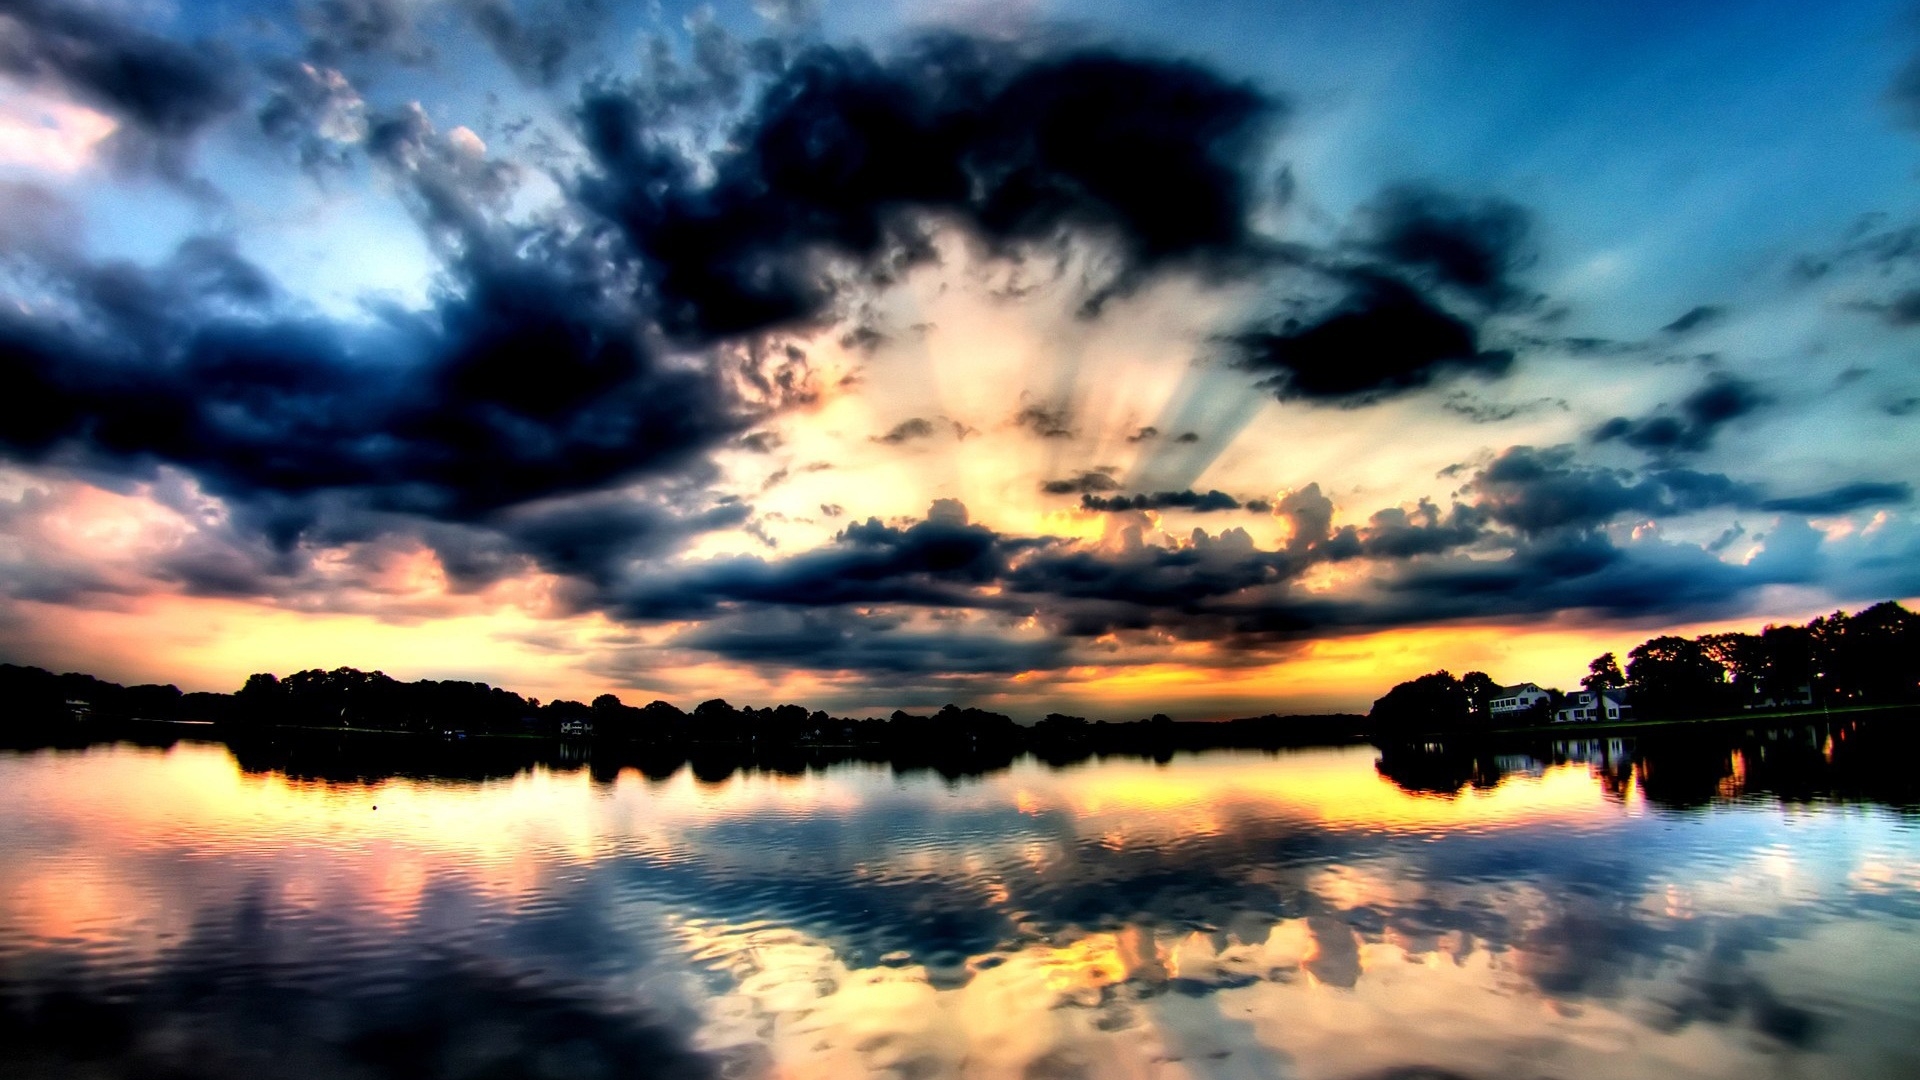 Very beautiful Sunset for 1920 x 1080 HDTV 1080p resolution